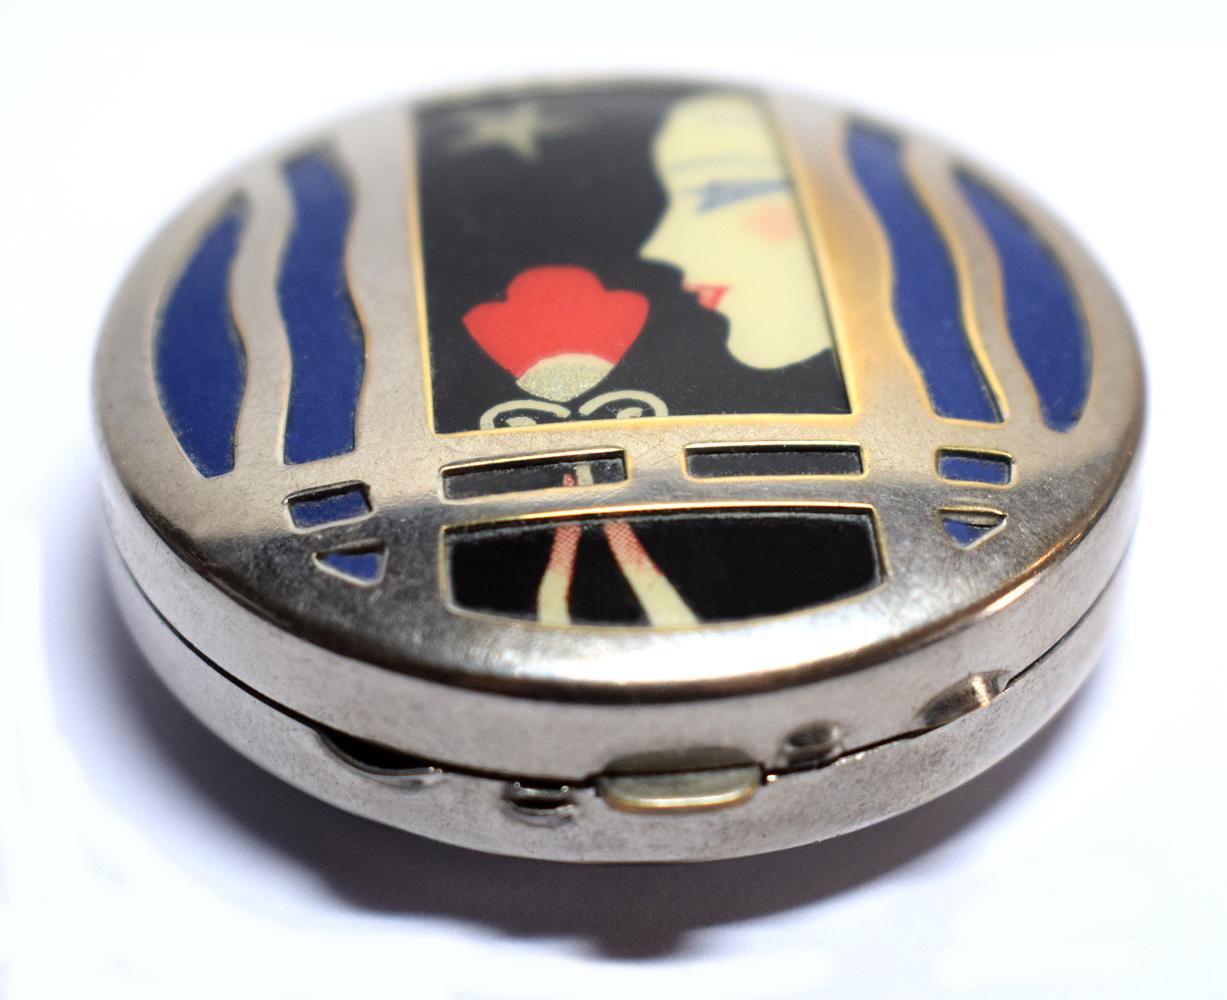 This has to be one of the most iconic of the Art Deco Ladies power compacts made by the Woodworth Company. This particular compact was made by the Scovill Manufacturing Company in 1928 for the Karess line. A truly attractive Art Deco ladies compact